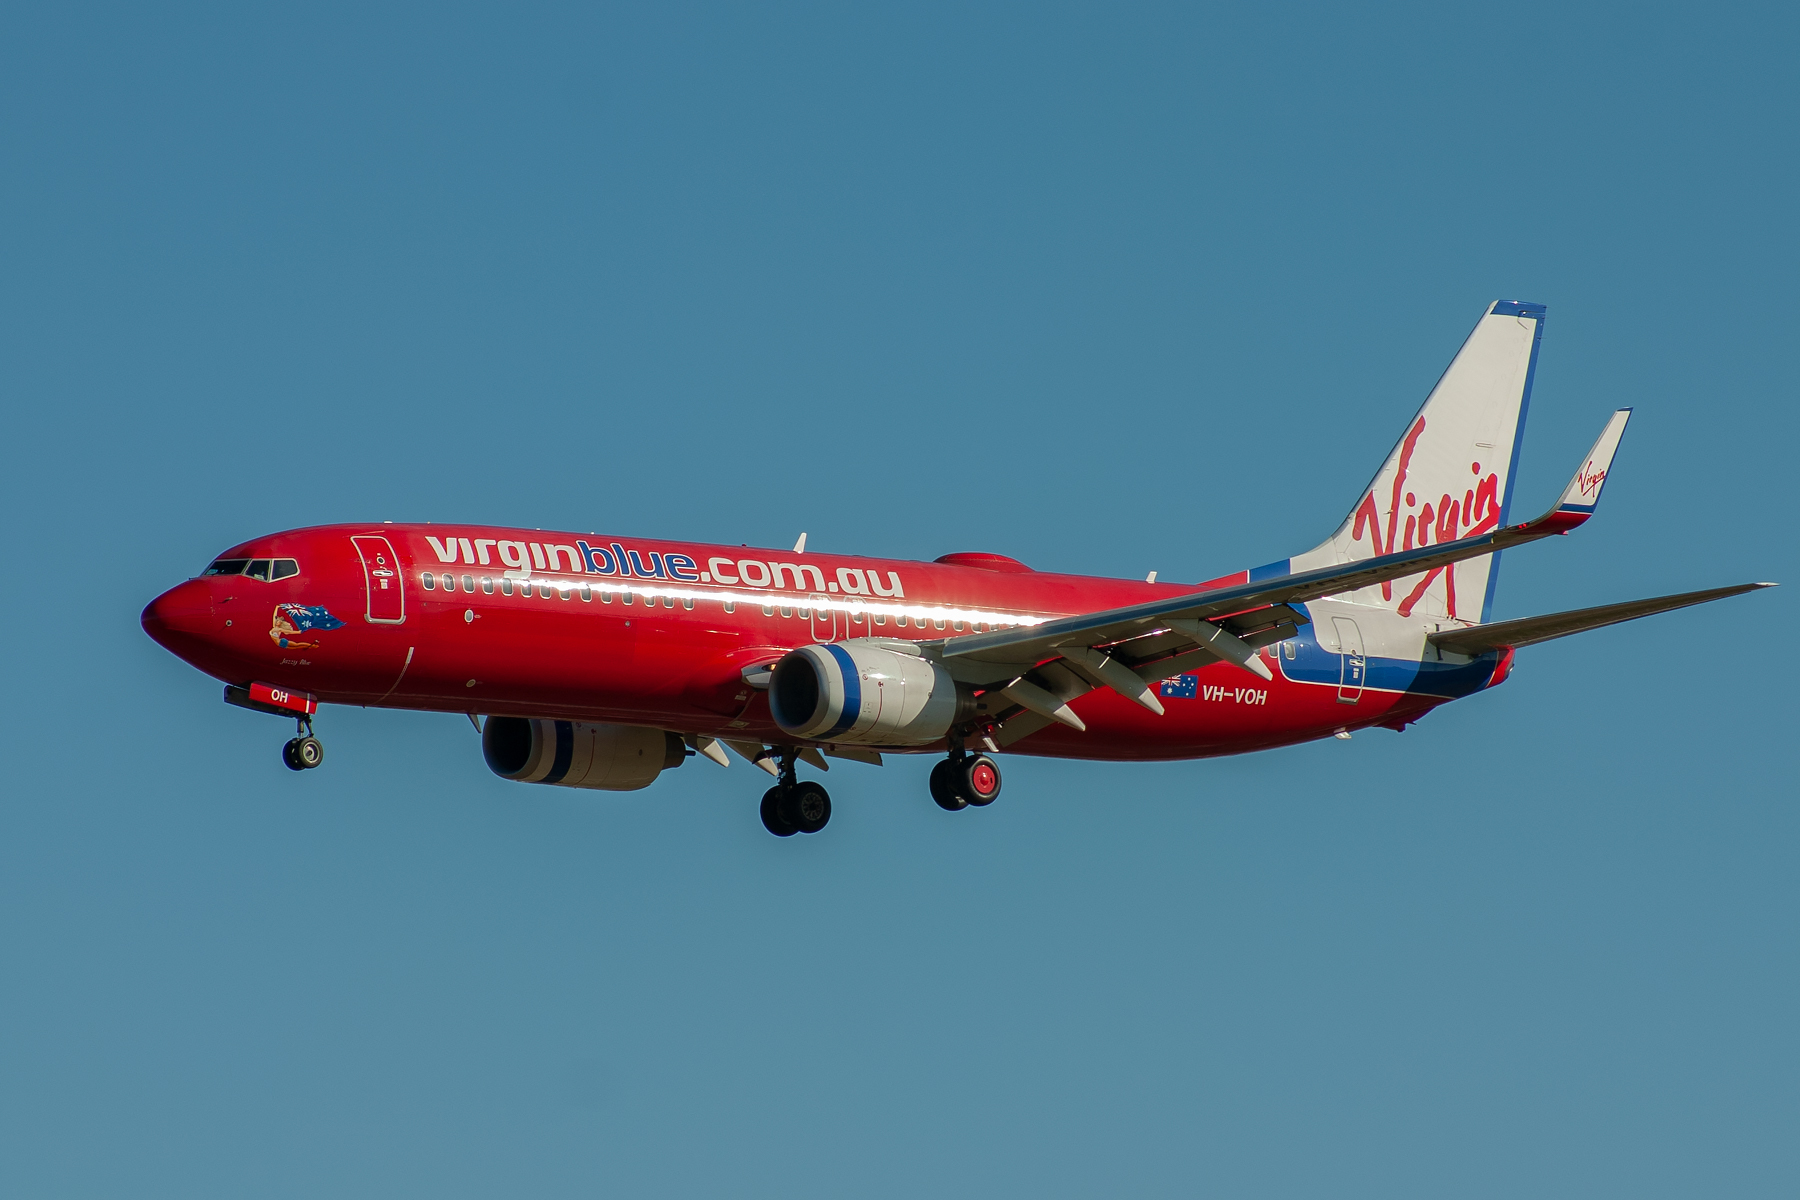 Virgin Blue Airlines Boeing 737-800 VH-VOH at Kingsford Smith